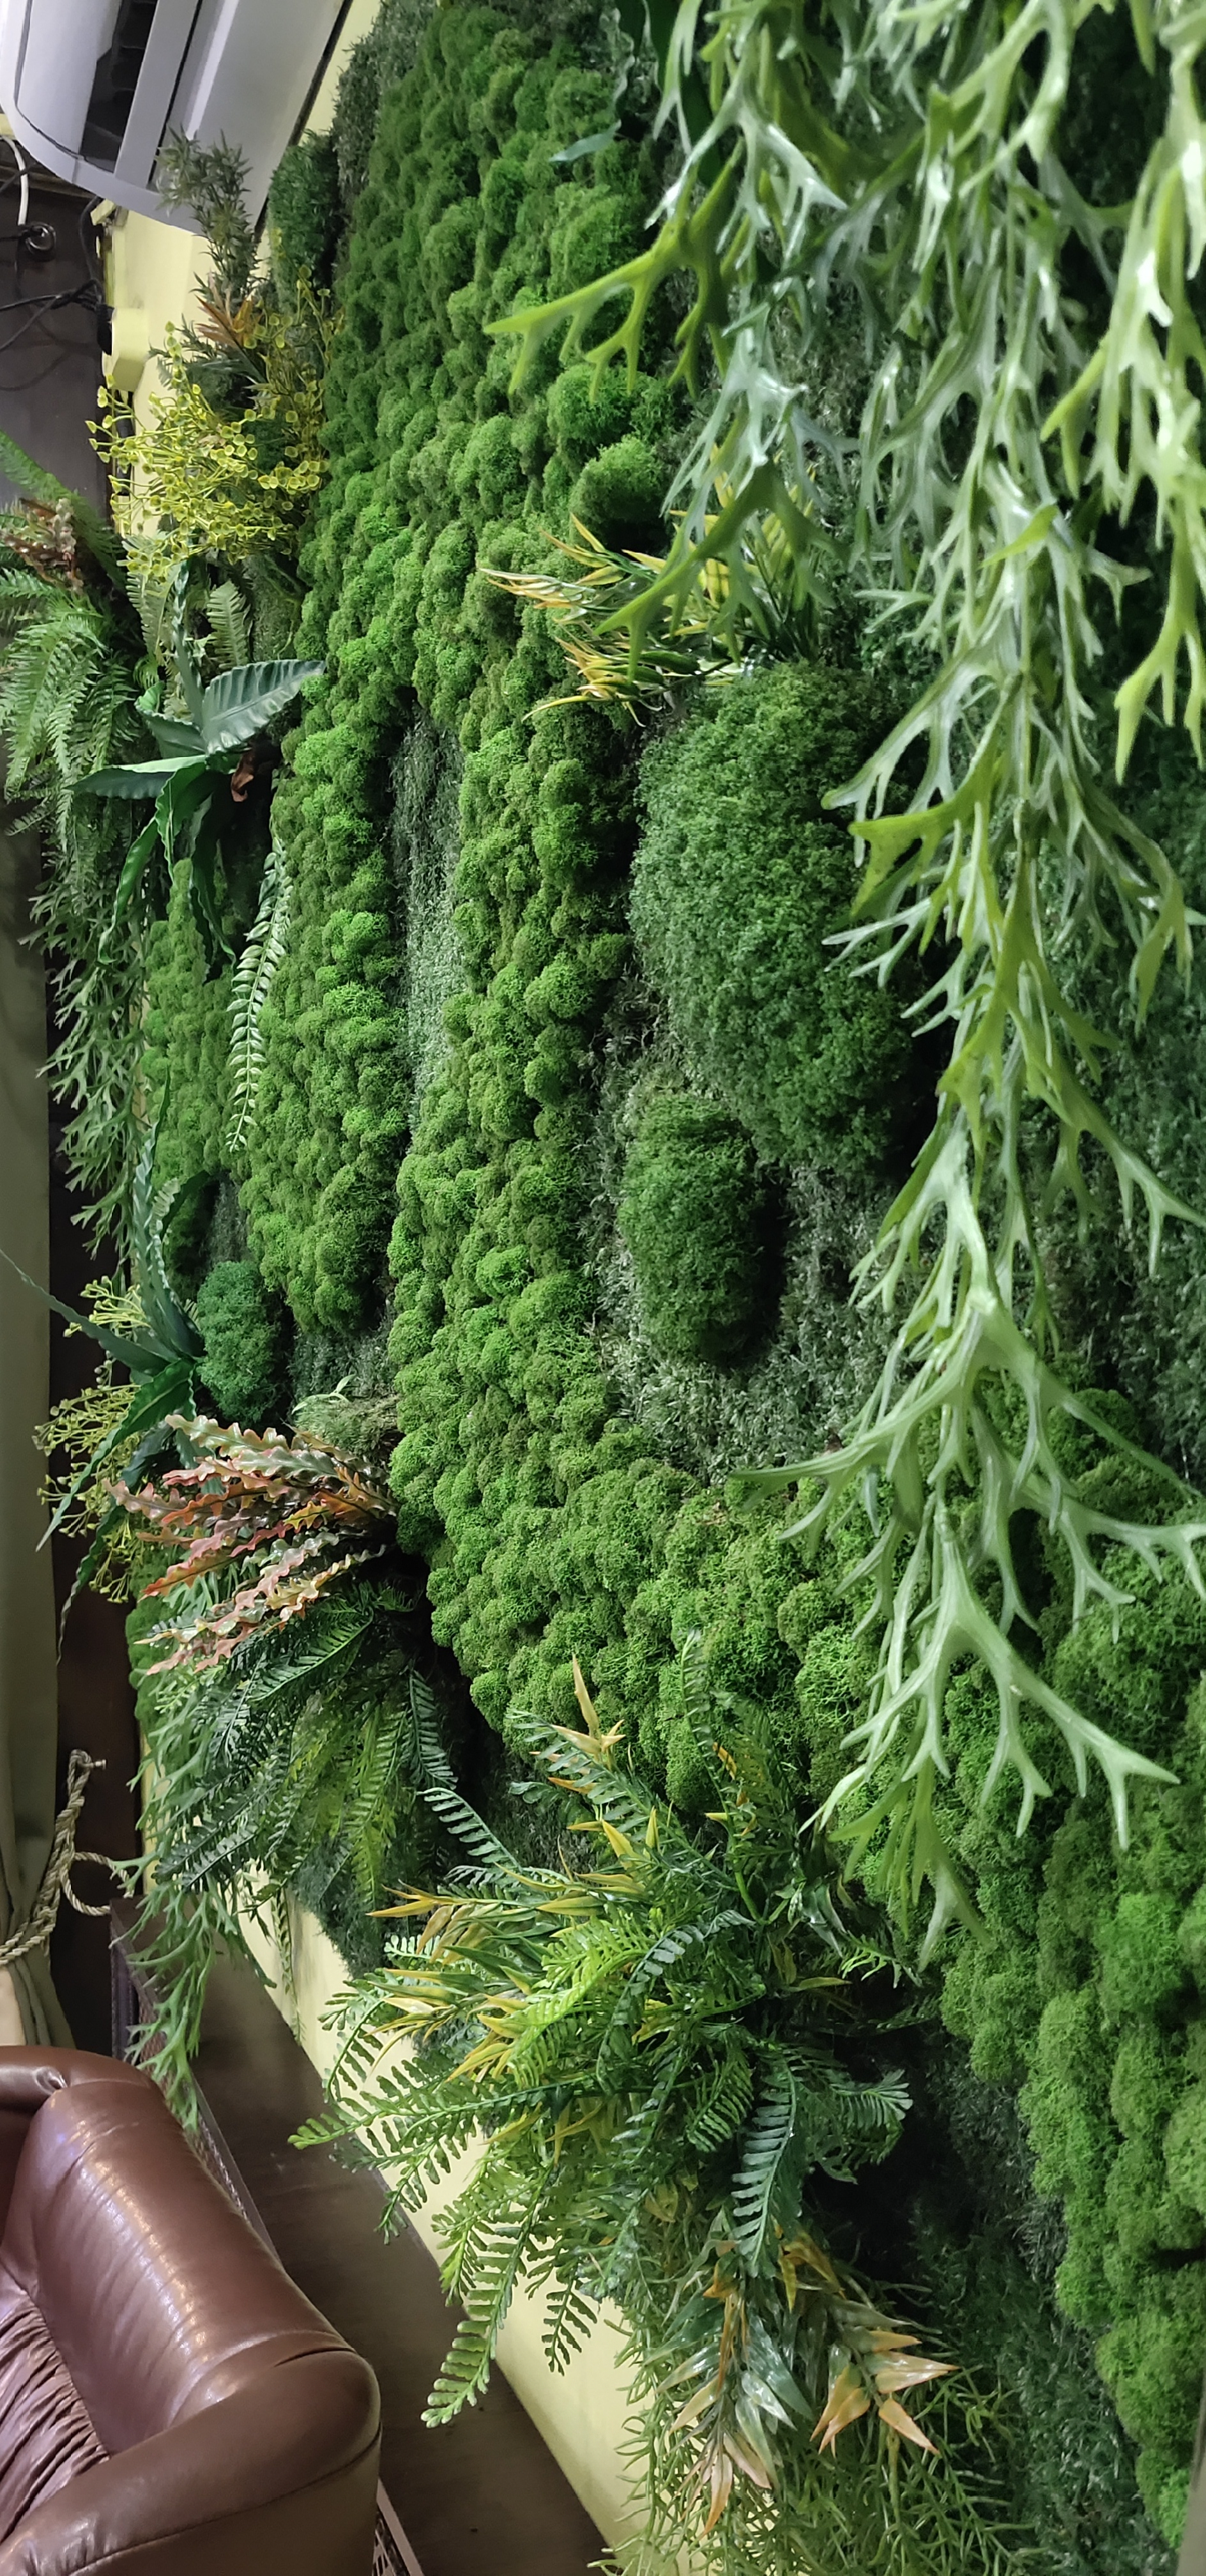 MOSS - My, Moss, Handmade, beauty of nature, Art, Vegetation, Registration, Creation, Cosiness, Style, Fashion, Painting, Invoice, Nature, Forest, Panel, Triptych, Longpost, Landscaping